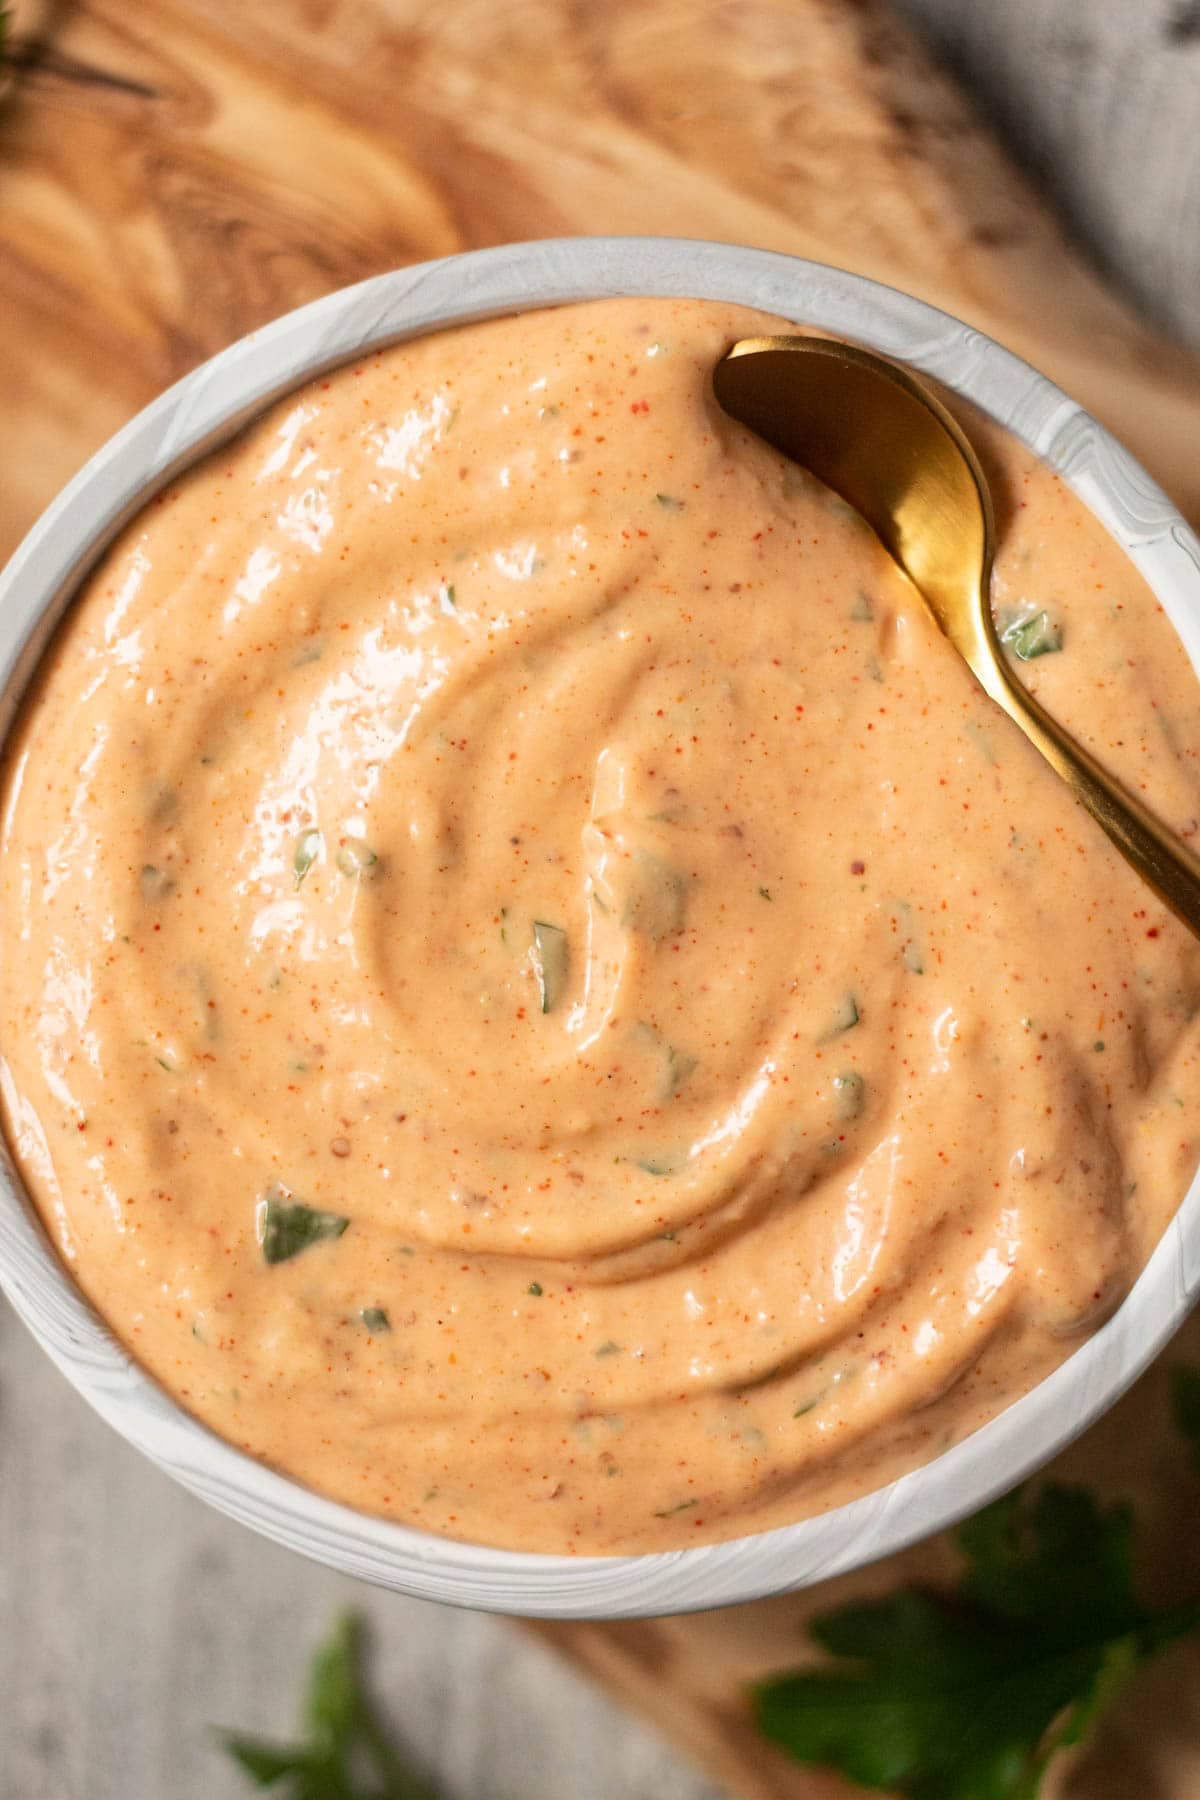 New Orleans remoulade sauce in a gray bowl.